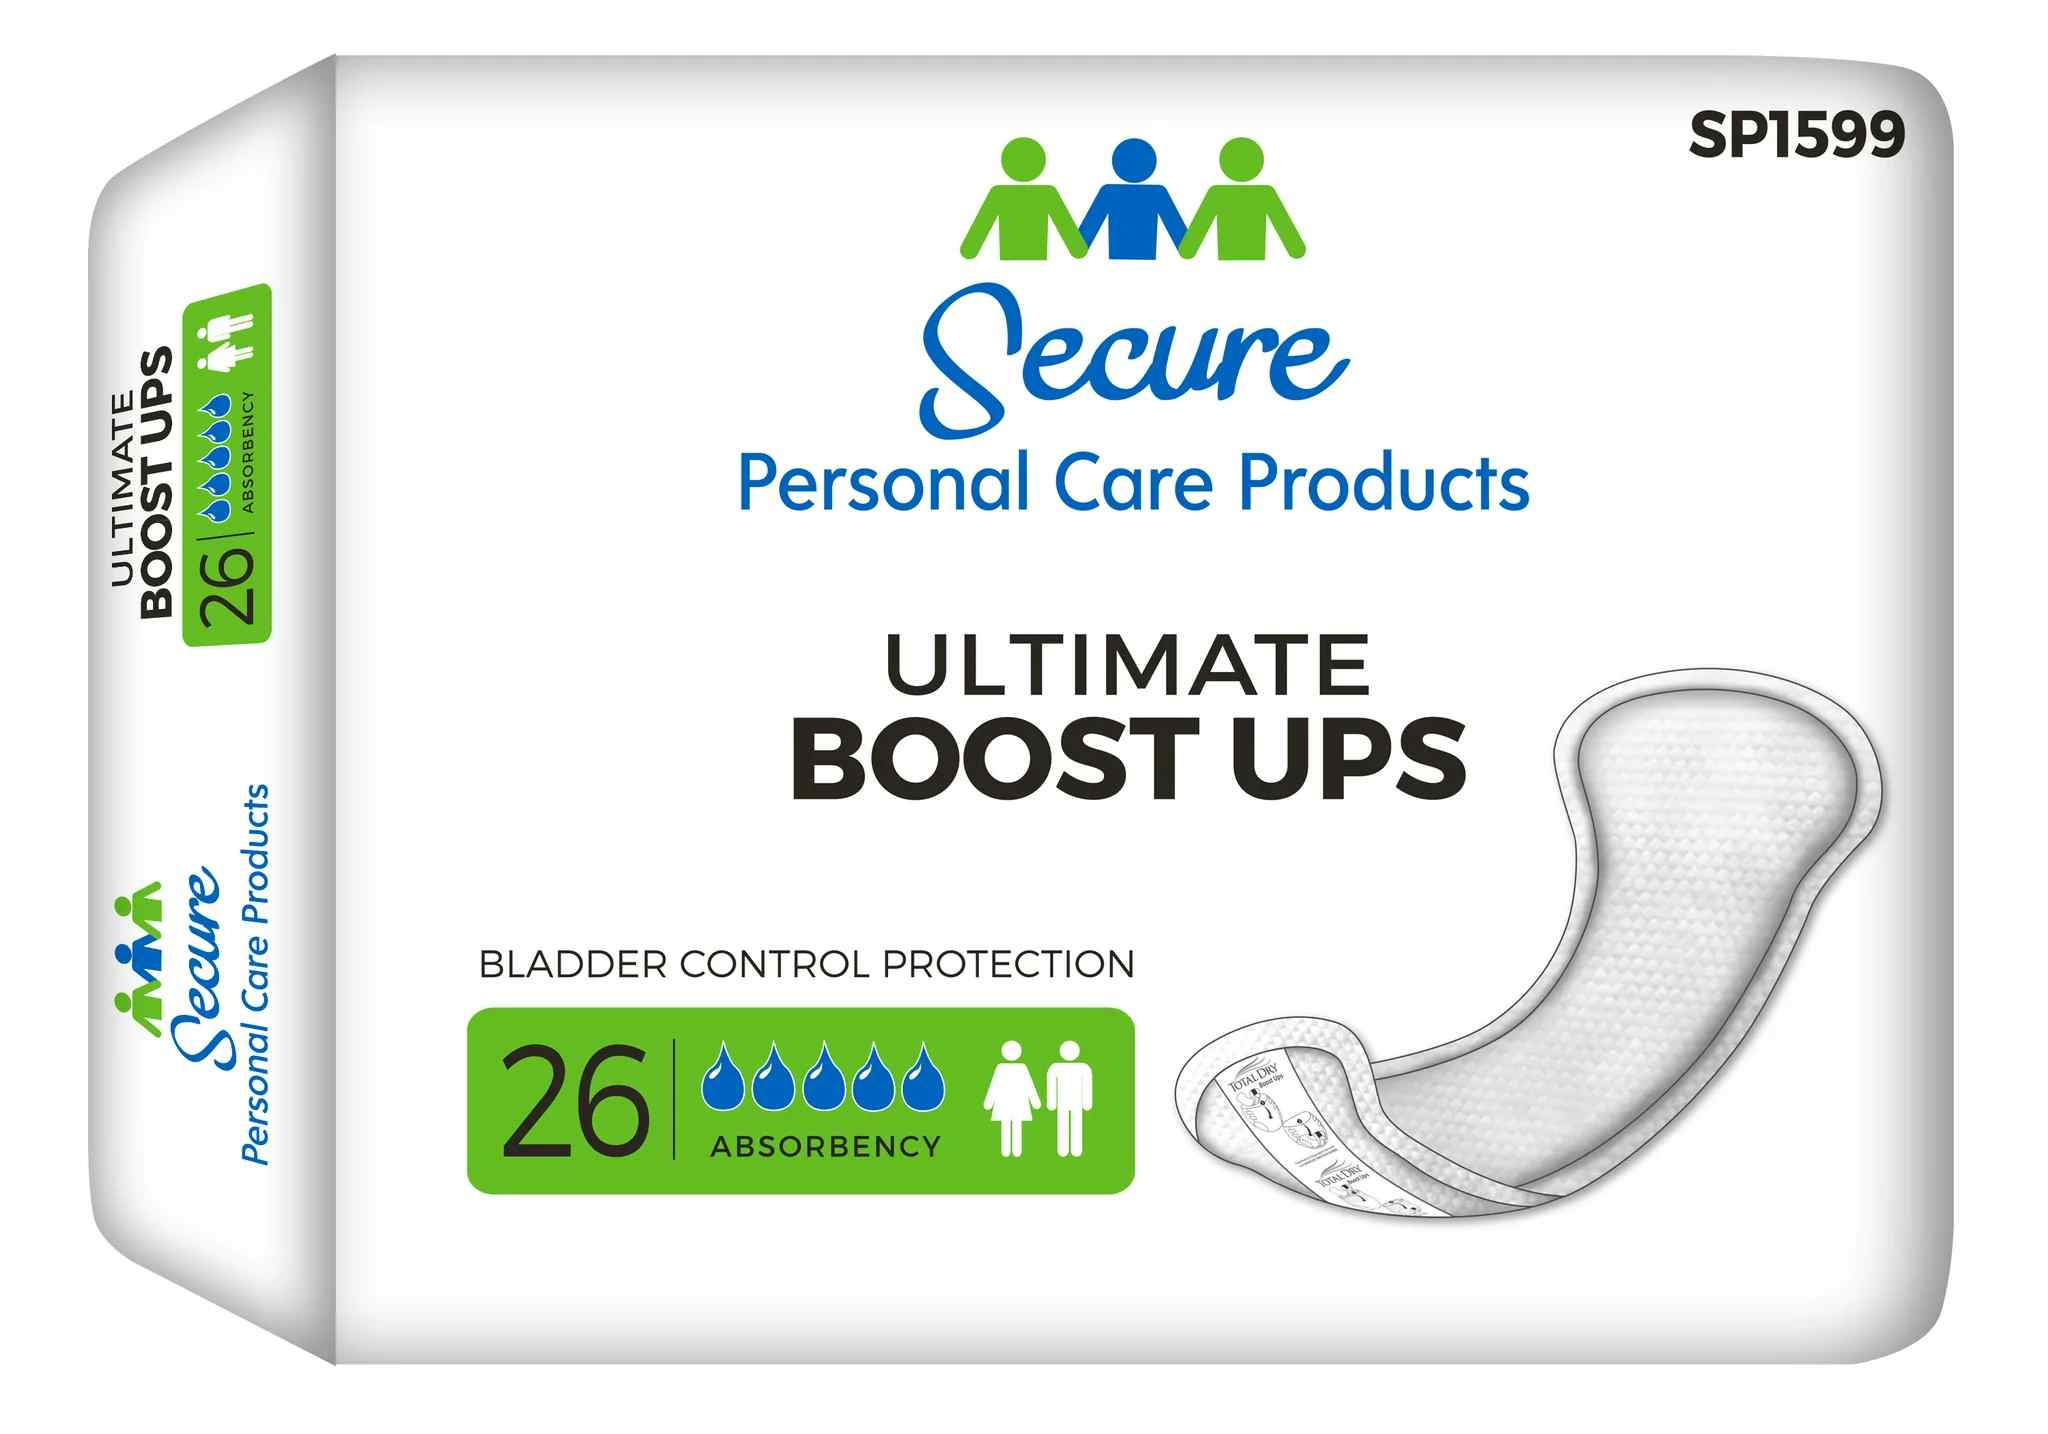 Secure Personal Care Products Ultimate Boost Ups Bladder Control Pad,SP1599, Case of 104 (4 Bags)